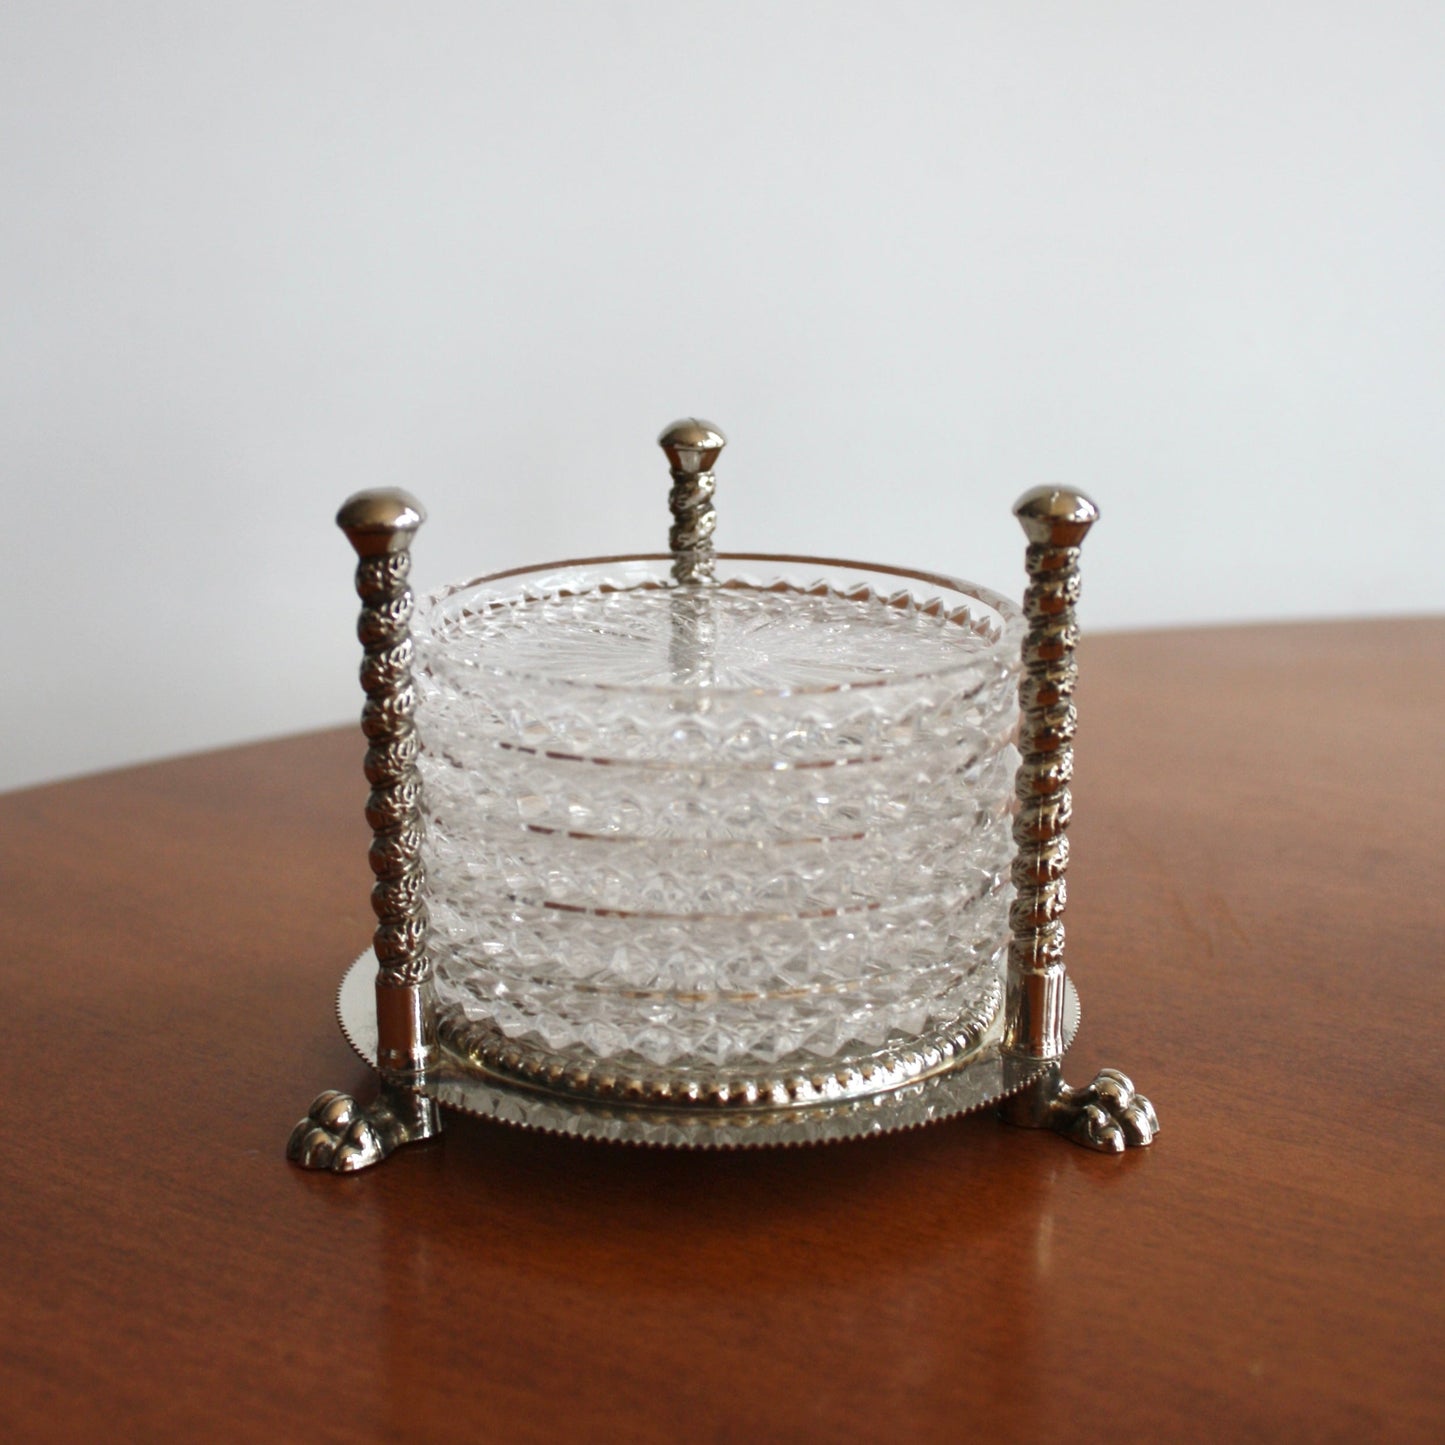 Crystal coaster set with Silver Plated Clawfoot Holder by F. B. Rogers